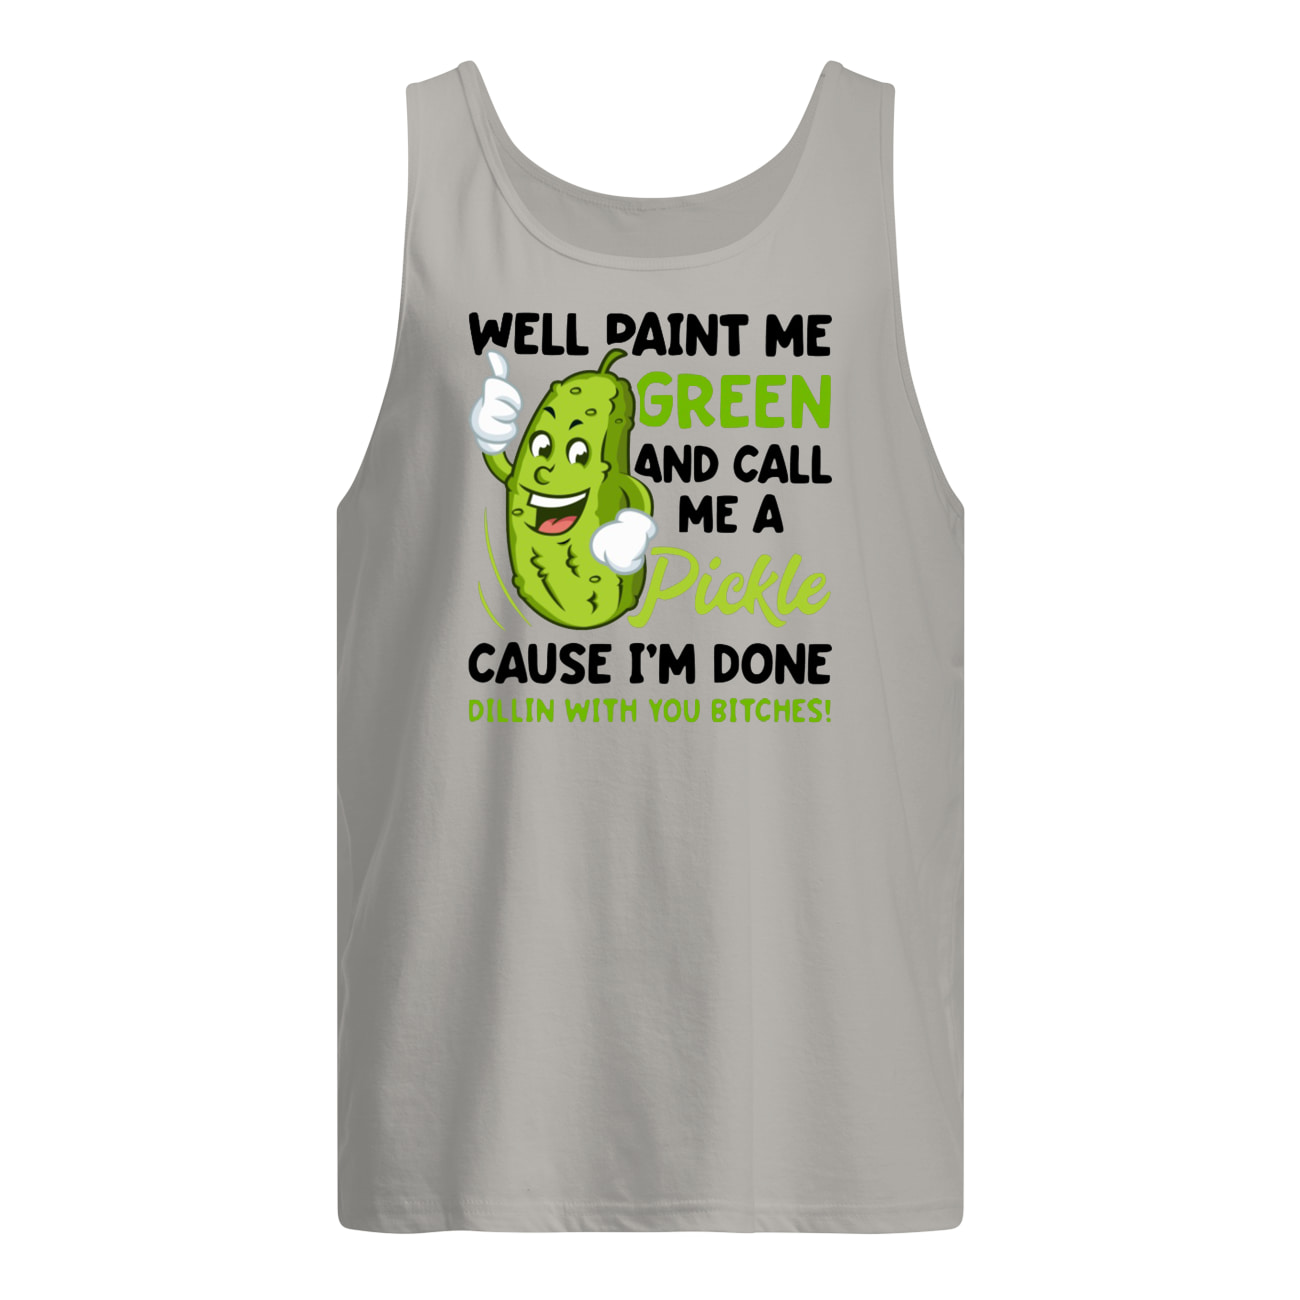 Well paint me green and call me a pickle because I’m done dillin’ with you bitches tank top